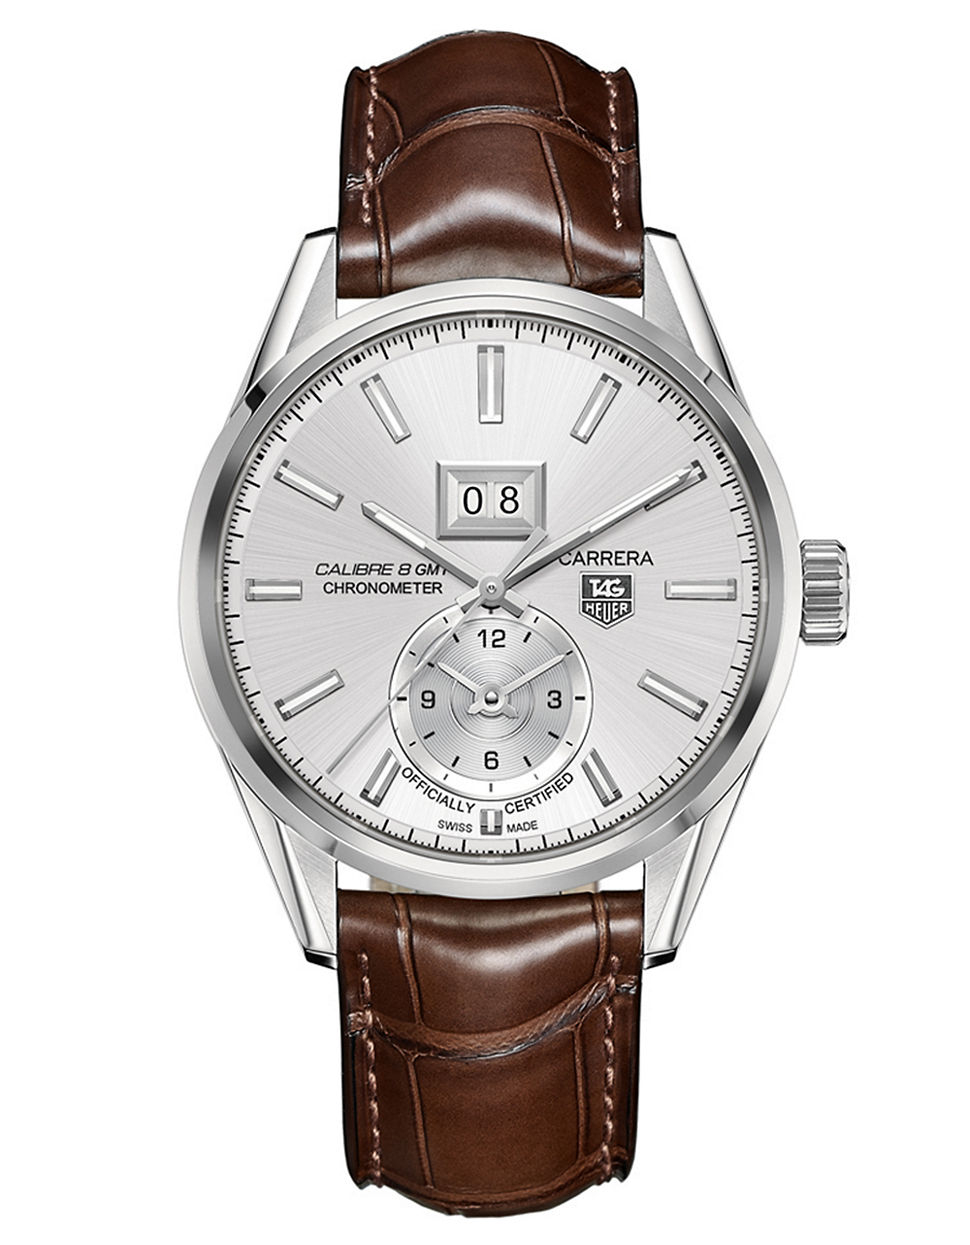 tag heuer calibre 16 brown leather band